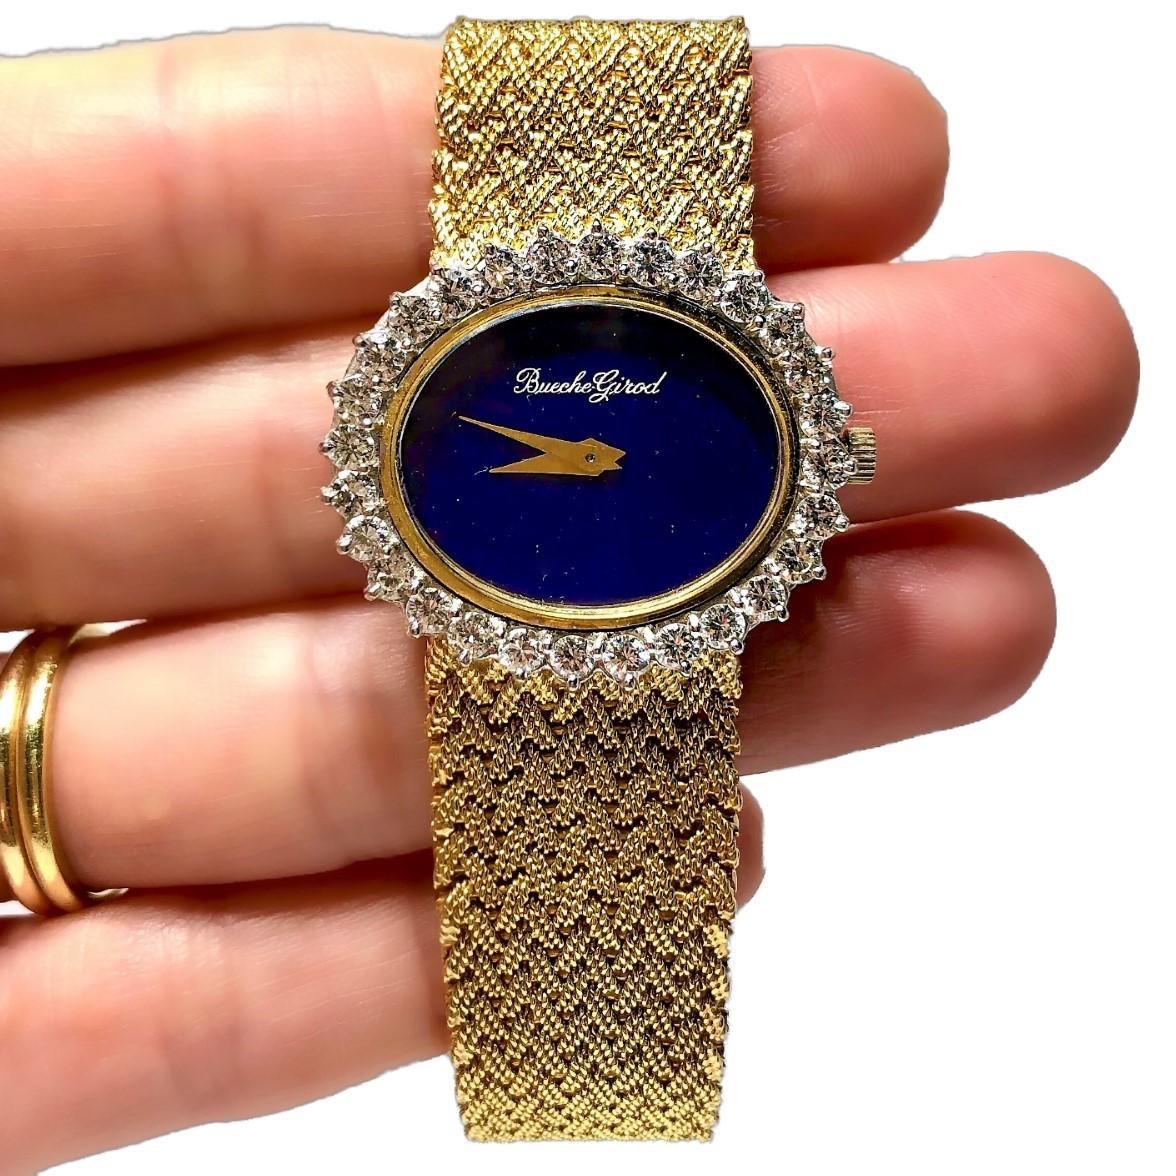 Yellow Gold Ladies Bueche Girod Watch with Oval Lapis Dial and Diamond Bezel 1